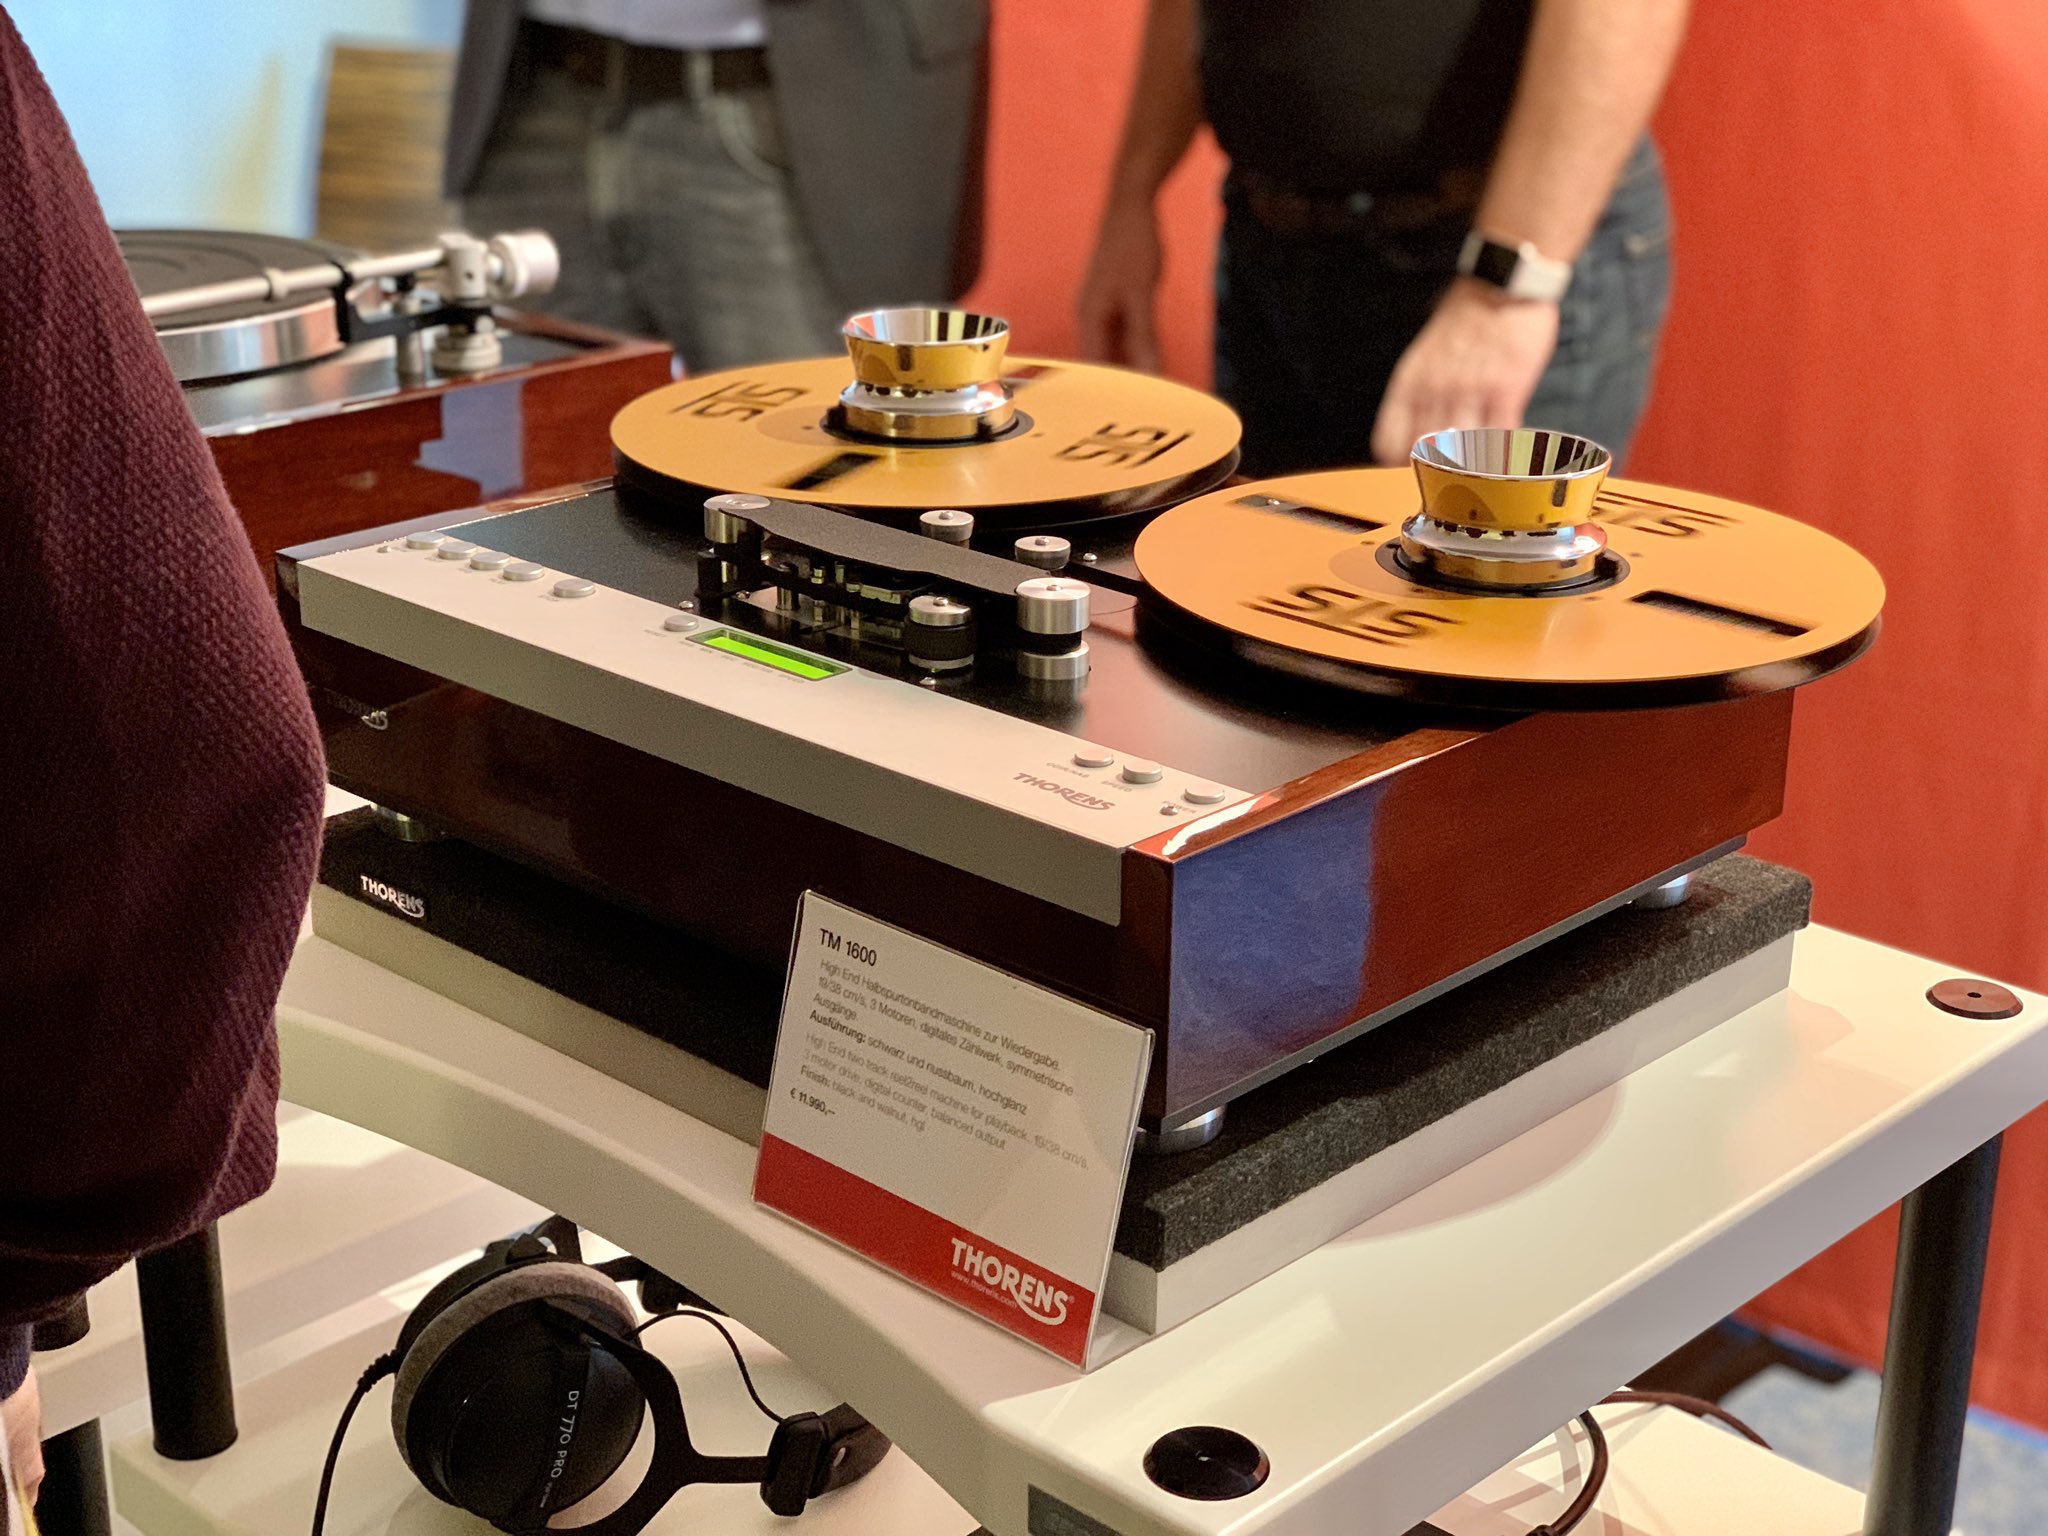 lite-magazin on Twitter: "Flashback to Norddeutsche Hifi-Tage 2020: Thorens presents it's new reel to tape player TM 1600. Expected available from end 2020. #litemagazin #ndht #ndht2020 #norddeutscheht https://t.co/pXTChPYdi2" / Twitter